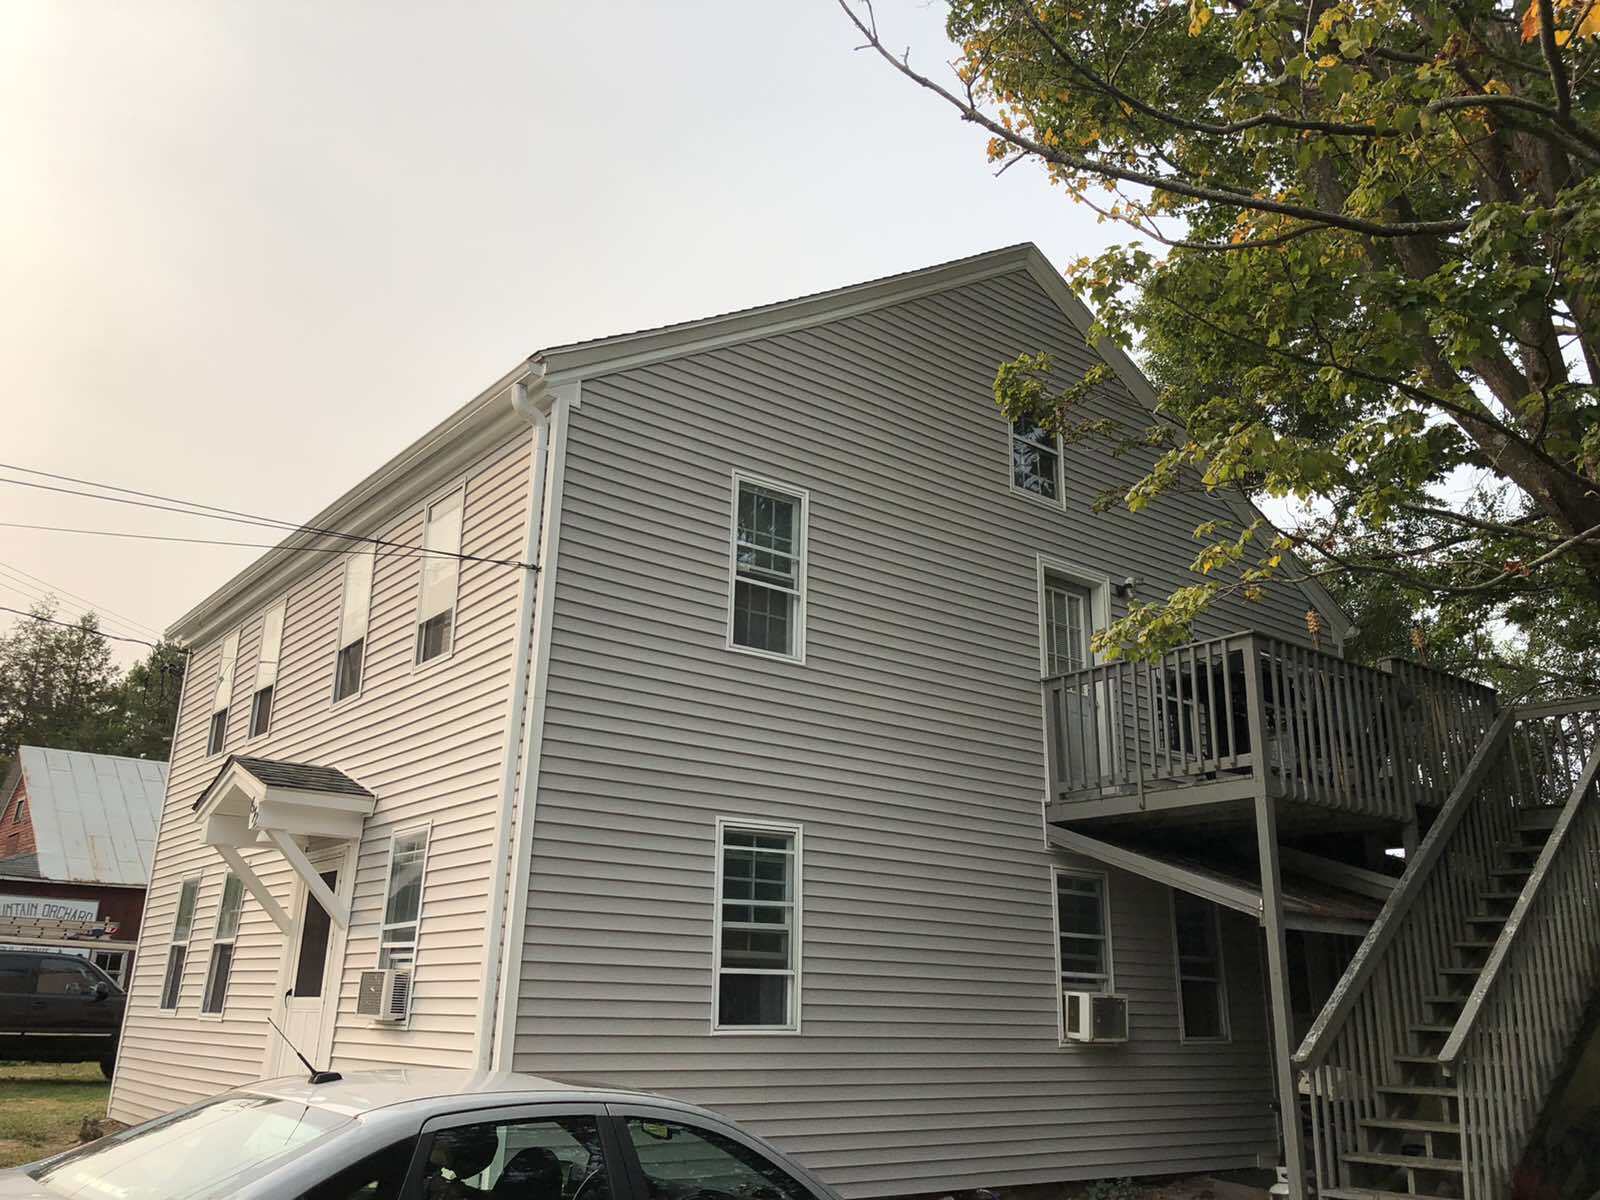 New siding provides a clean and beautiful look.